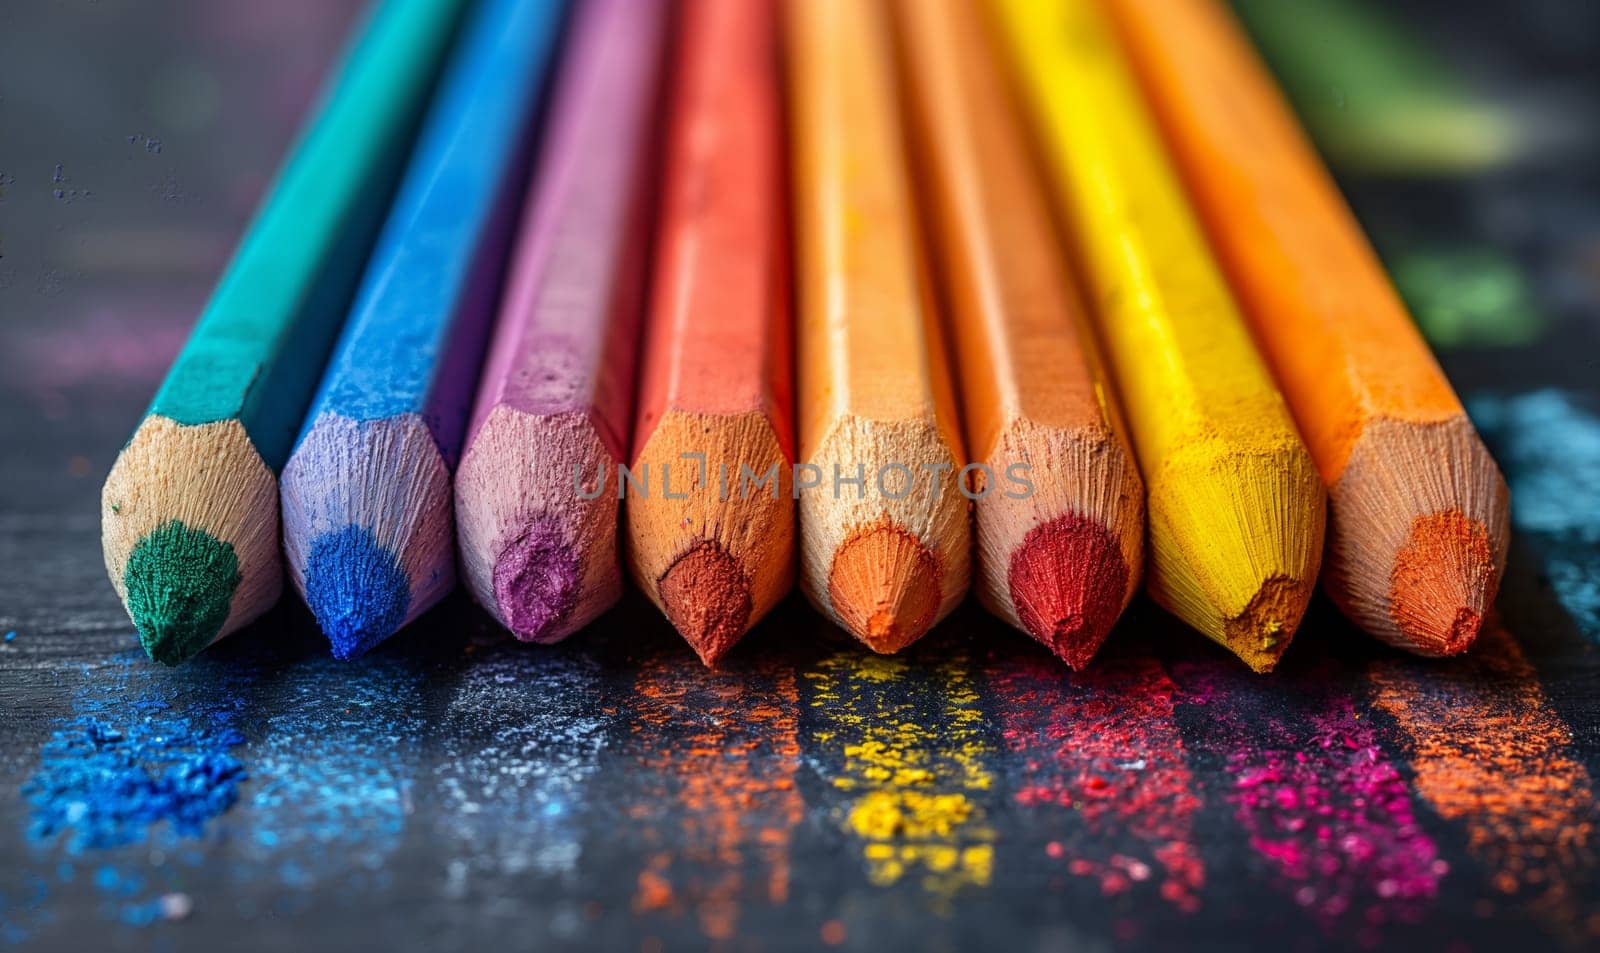 Row of Colored Pencils on Table. Selective focus.